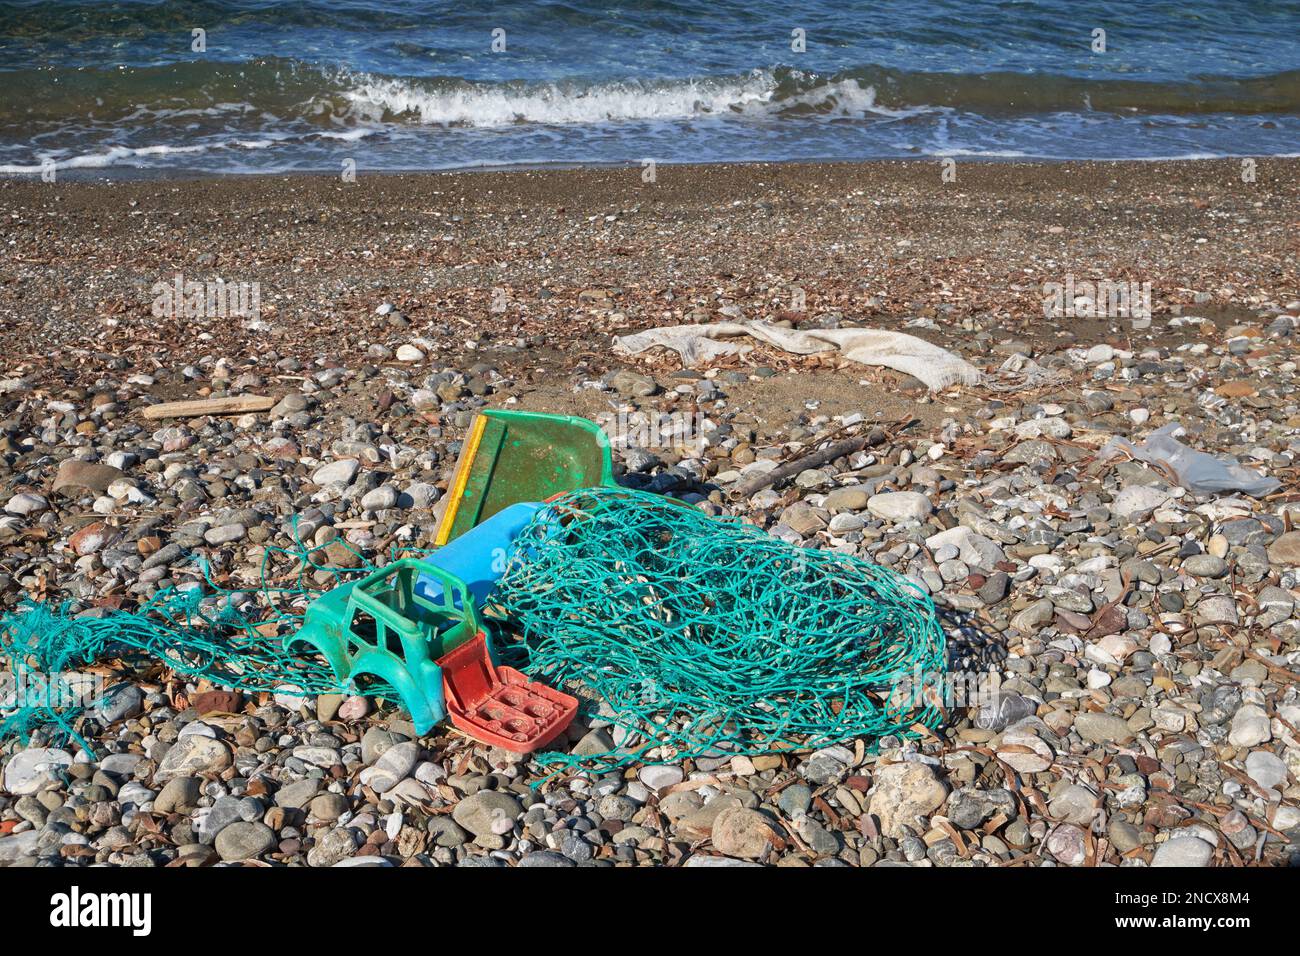 Plastic rubbish washed up on the beach, Peloponnese, Greece Stock Photo